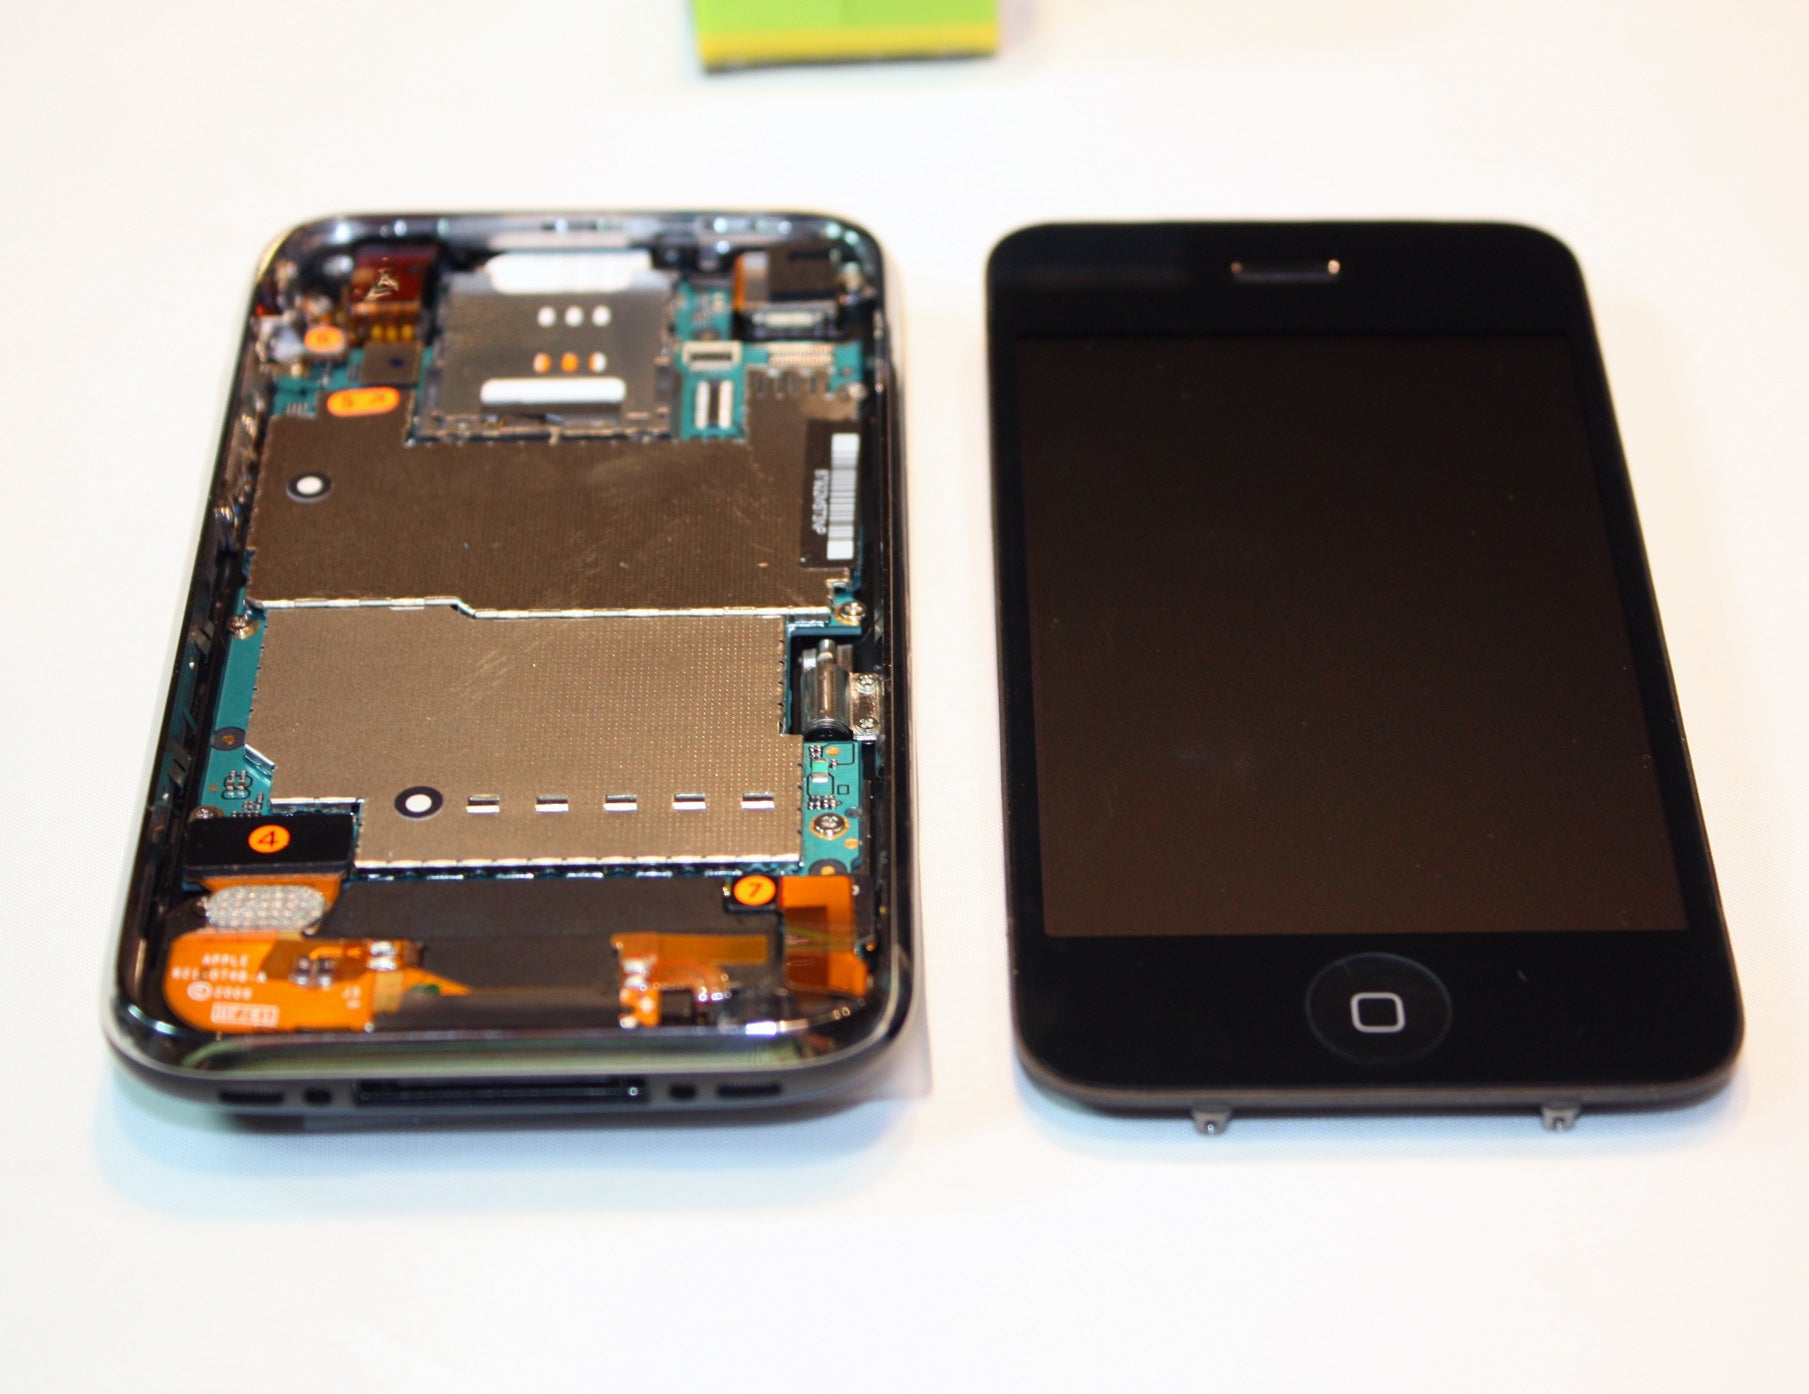 Typical teardown treatment performed on iPhone 3G S